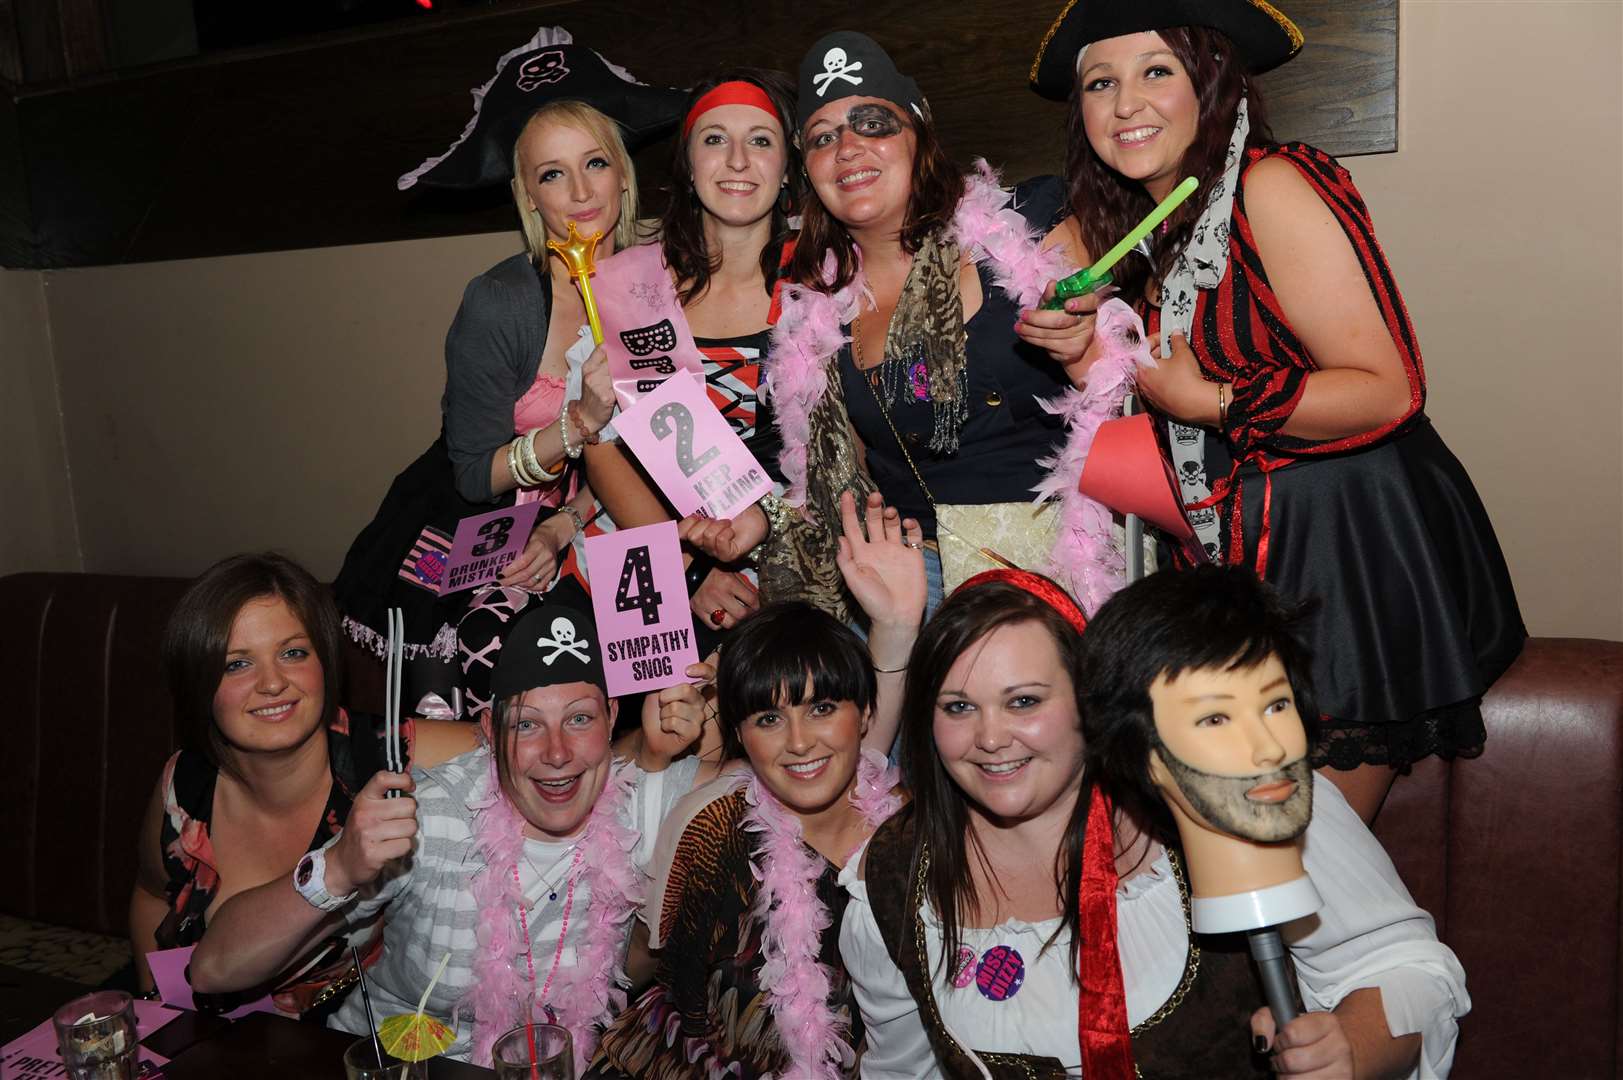 Pirate theme hen night for Louise Coull (back 2nd left) with her crew at Smith n Jones.